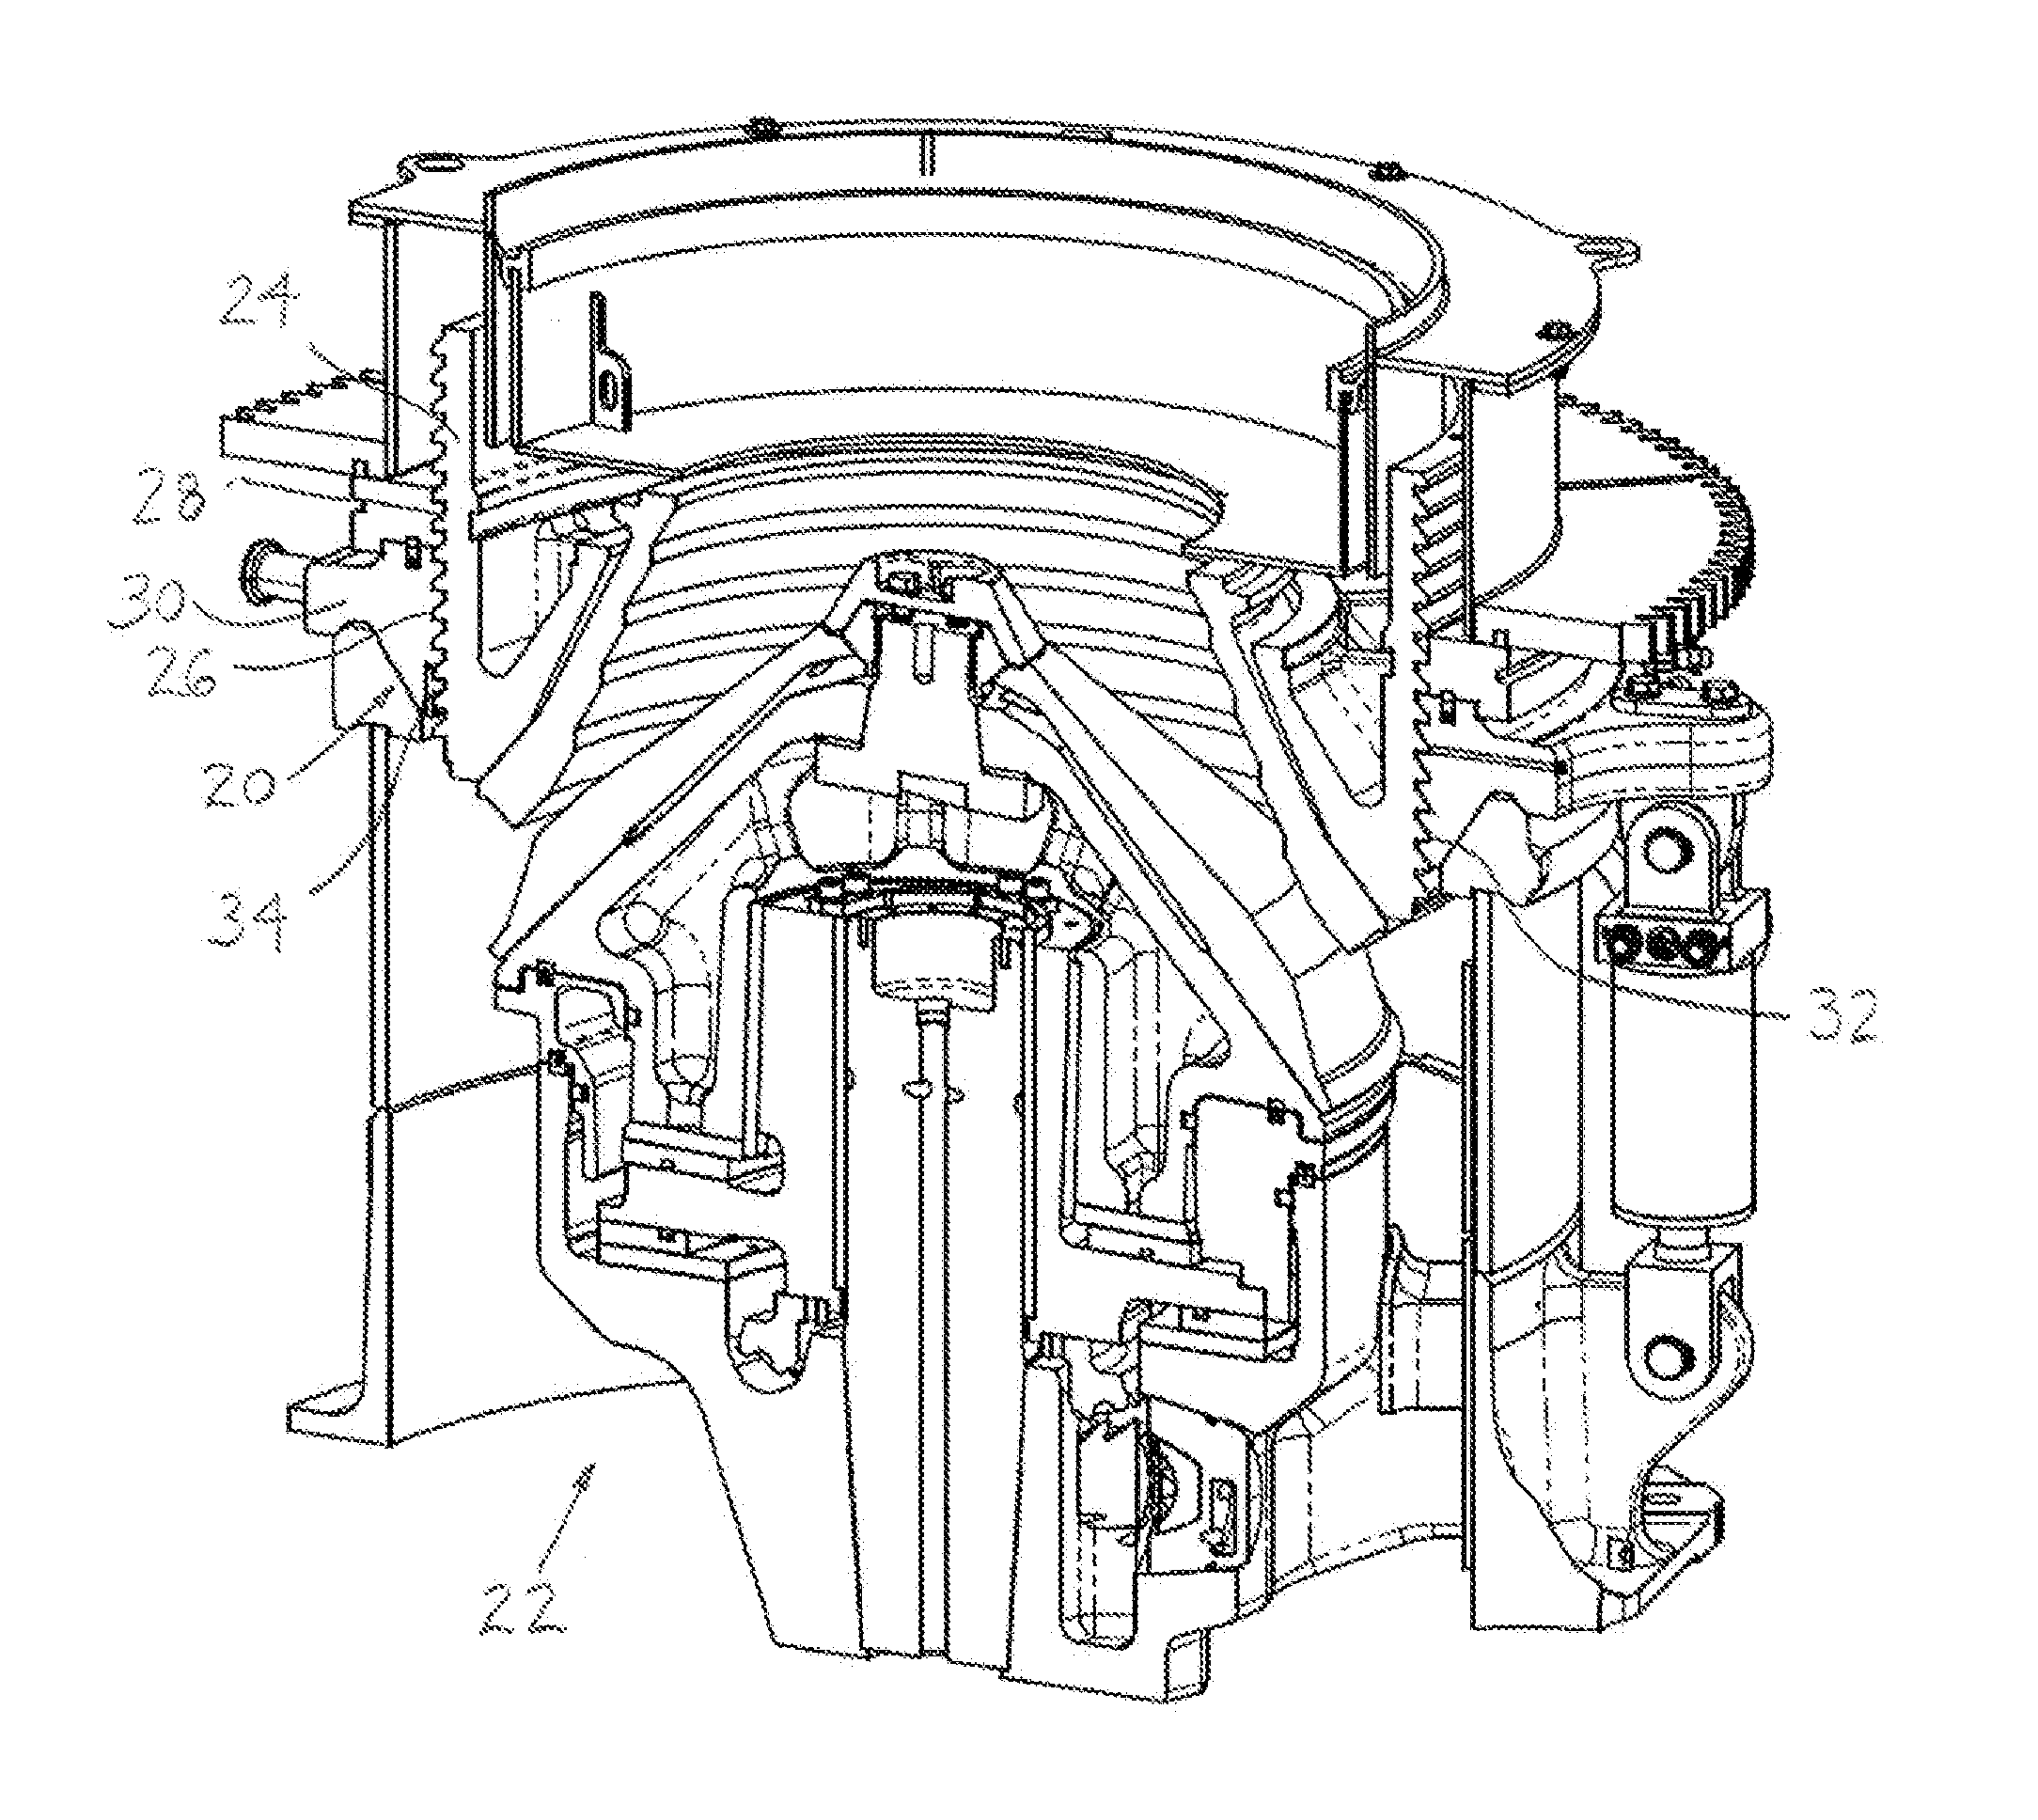 Apparatus and method for a sealing system